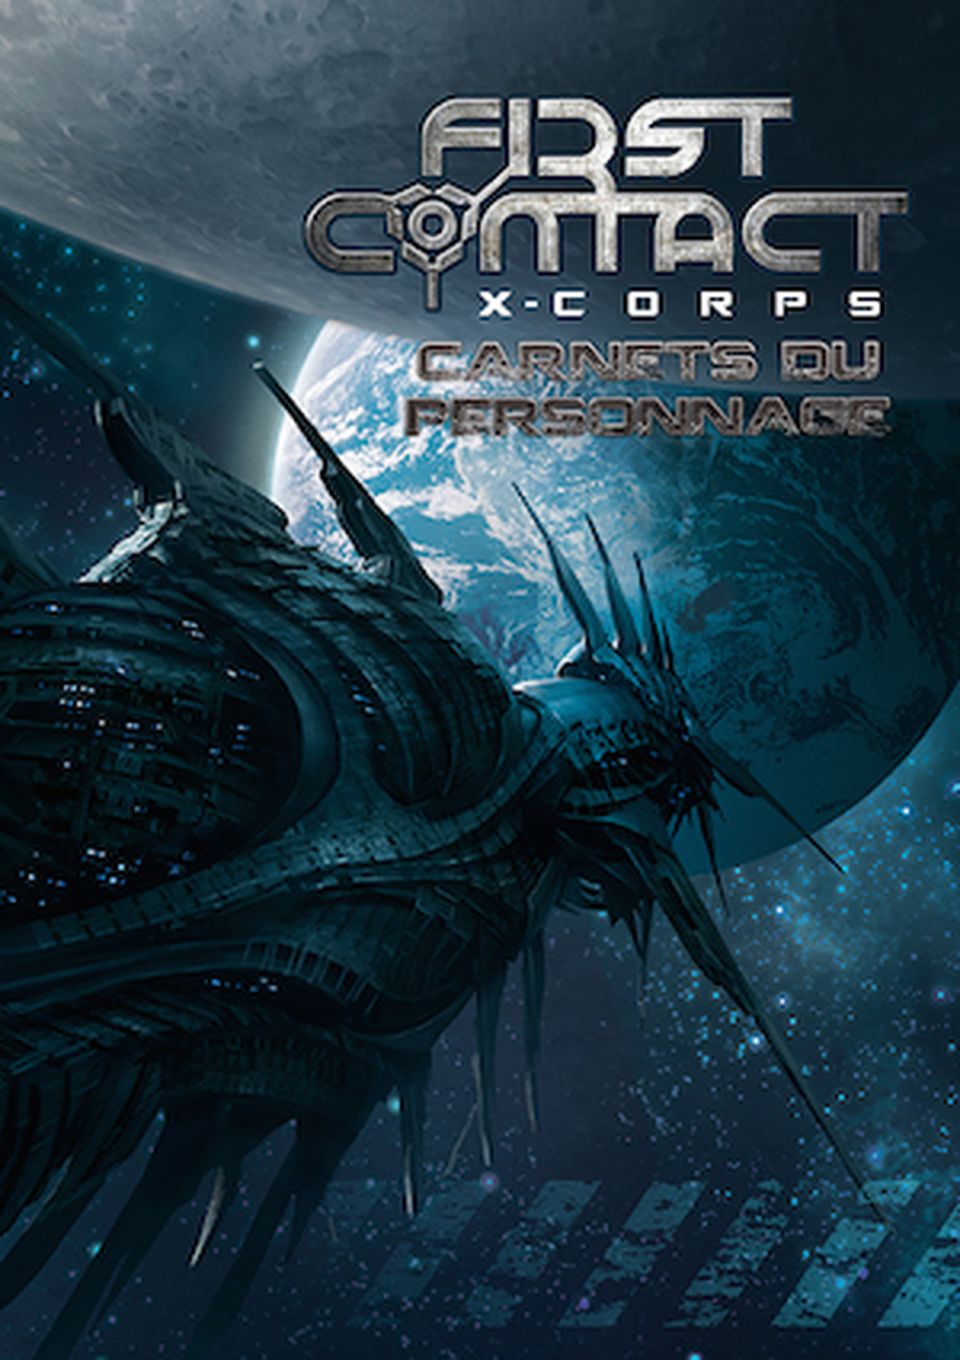 First Contact X-Corps - Carnets du Personnage image